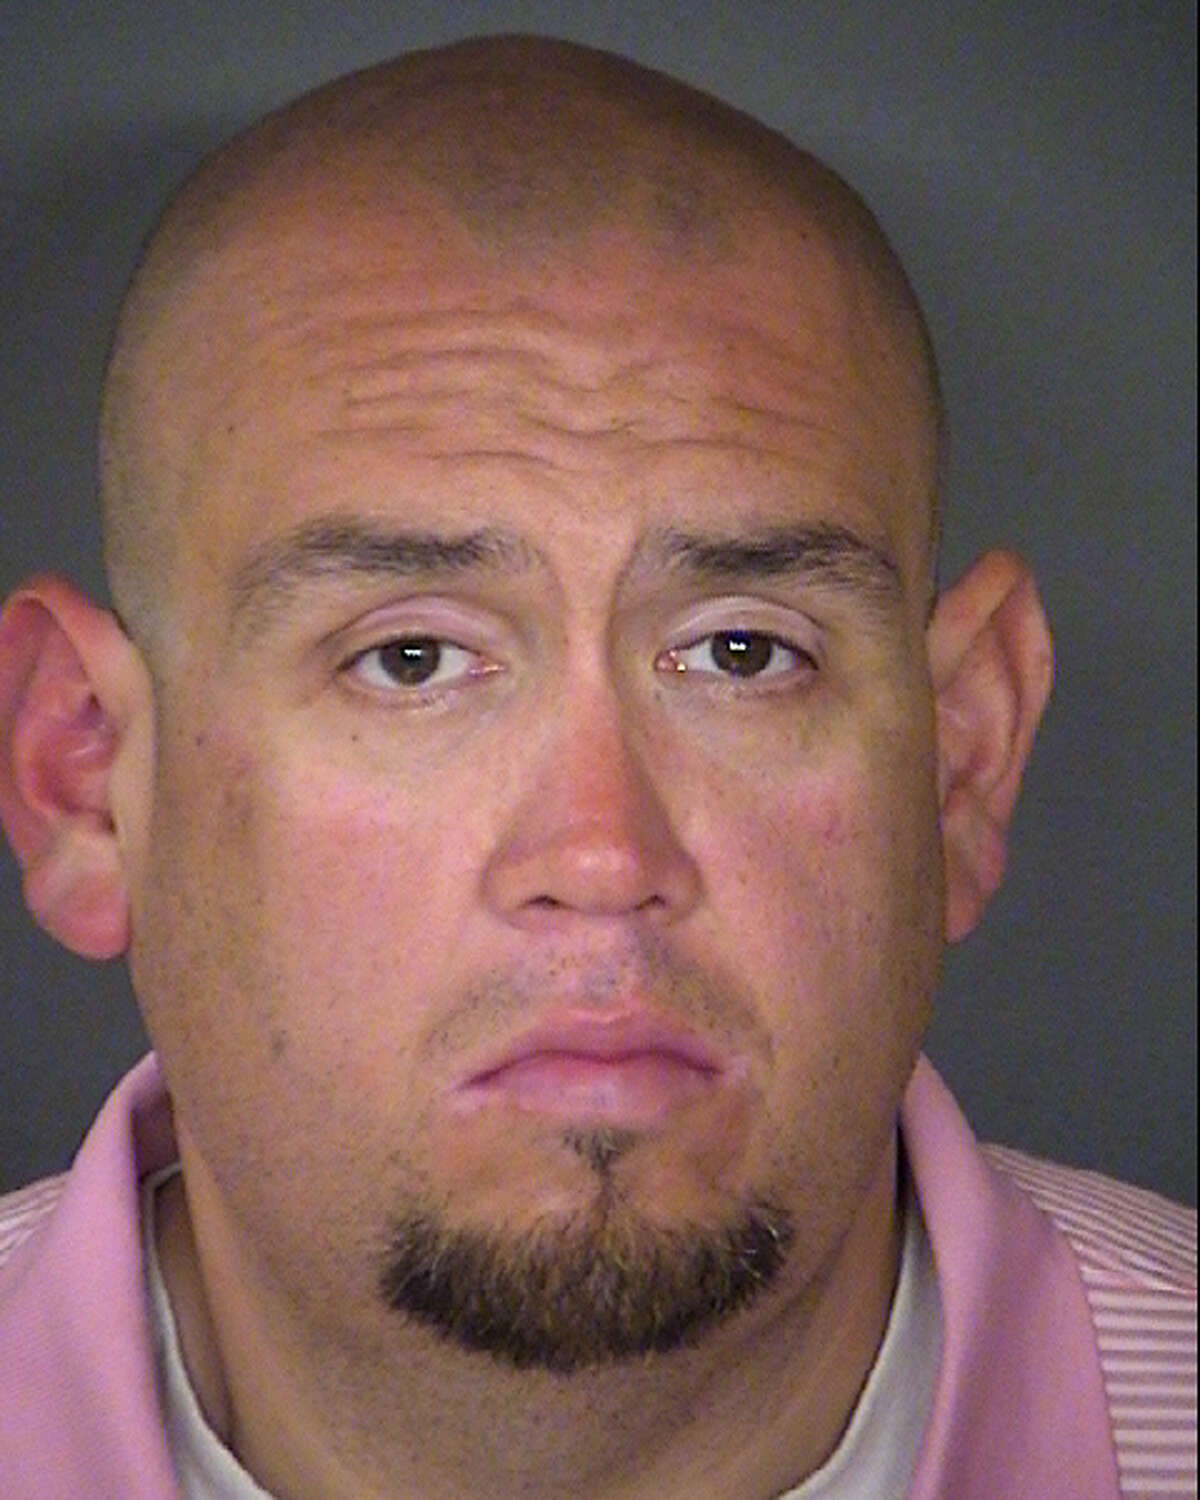 Mario Cajas has been charged with continuous sexual abuse of a child, according to Bexar County Jail records.